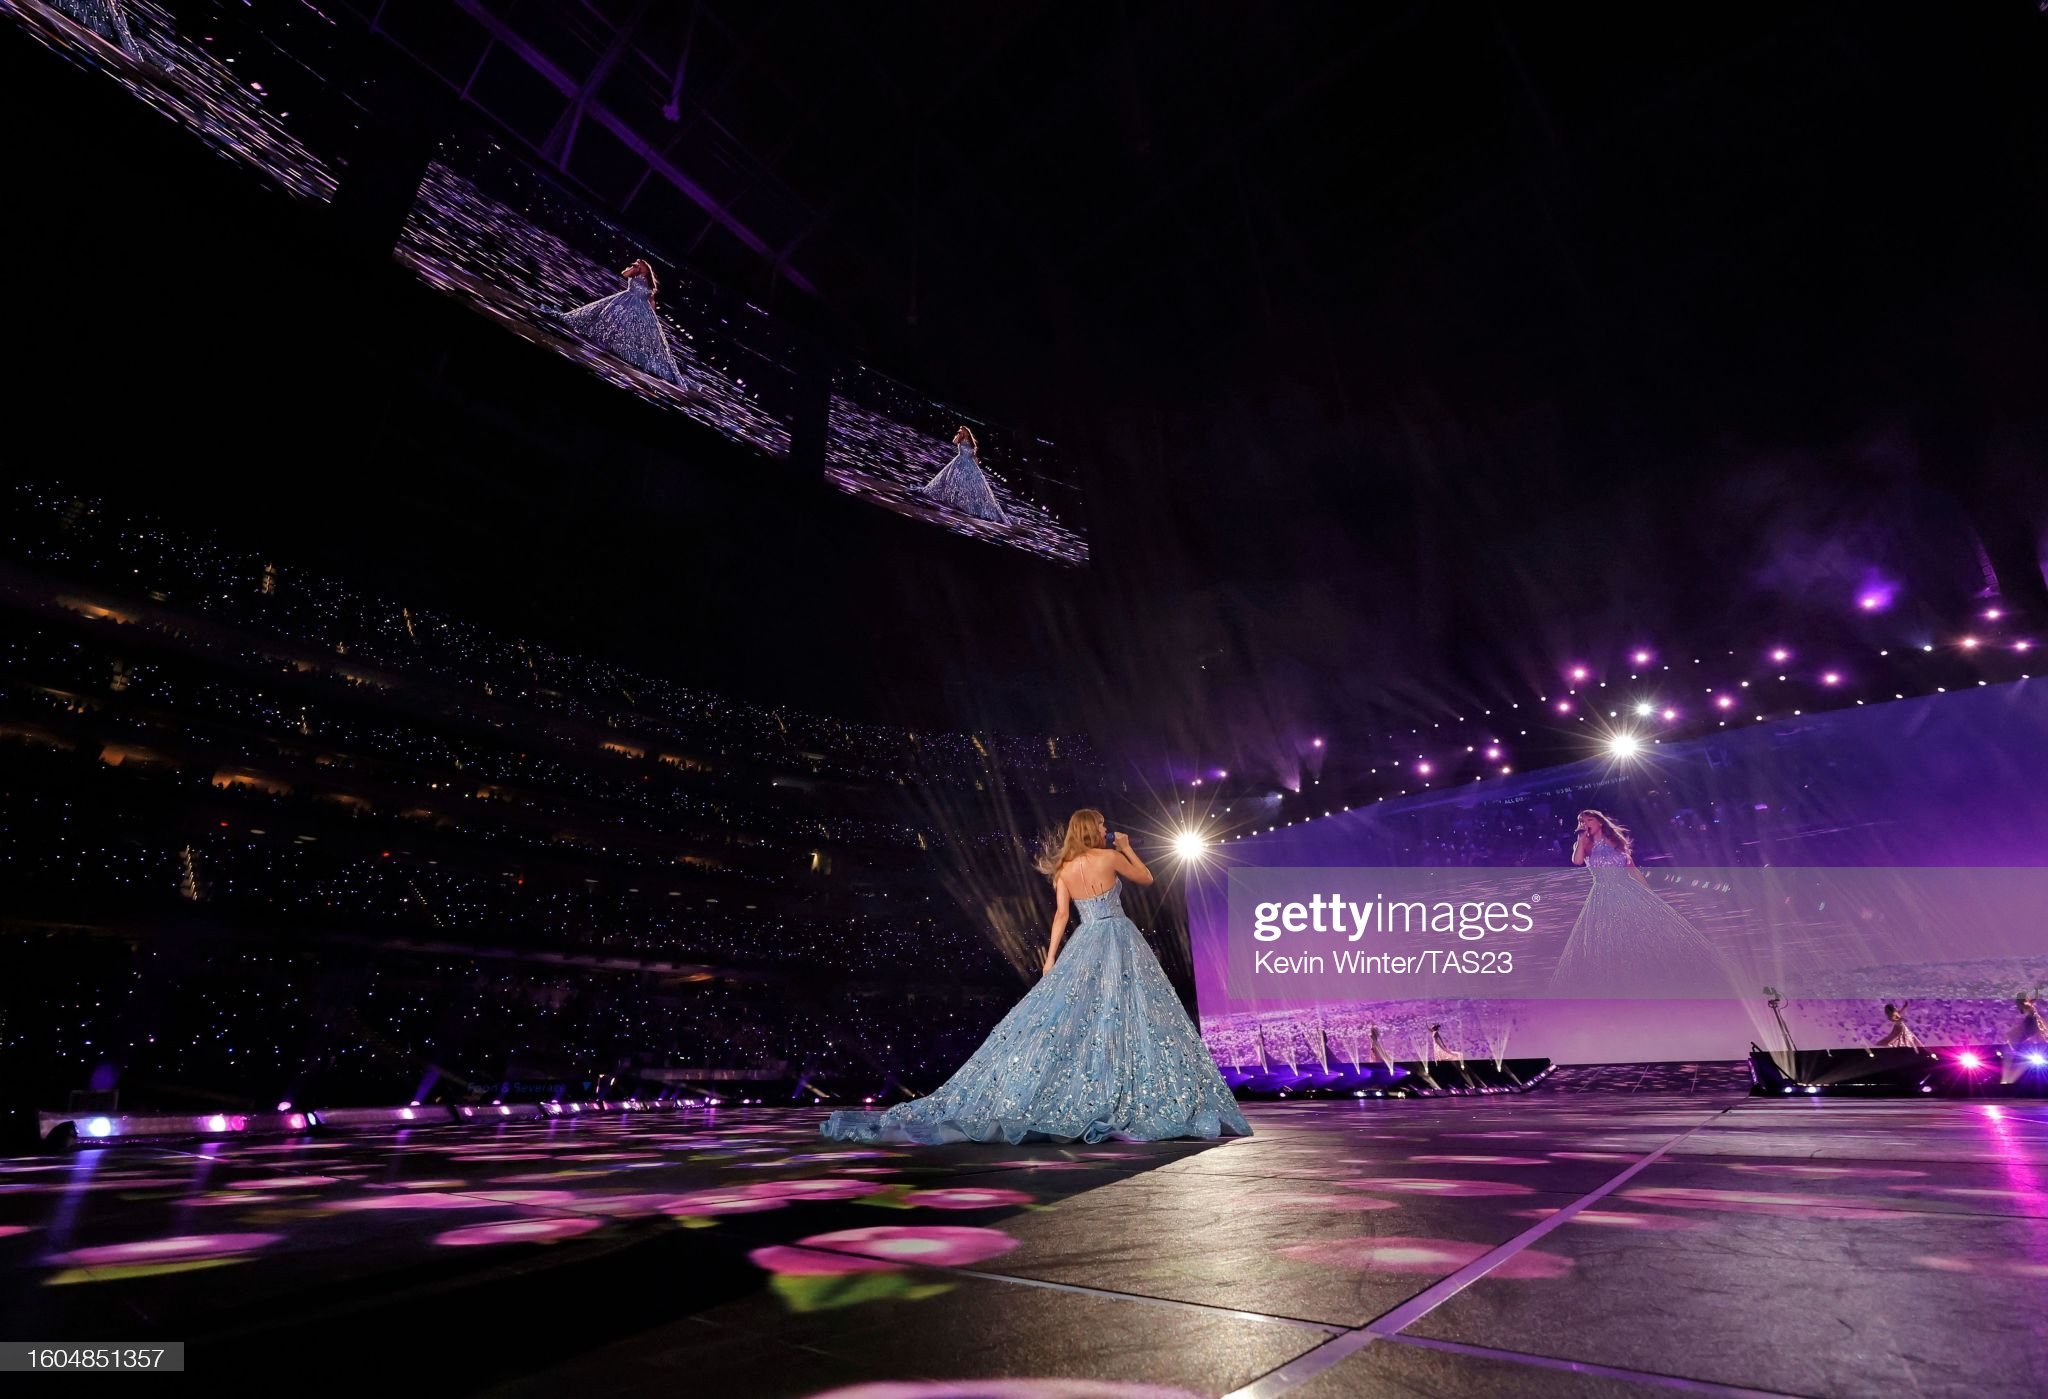 gettyimages-1604851357-2048x2048.jpg